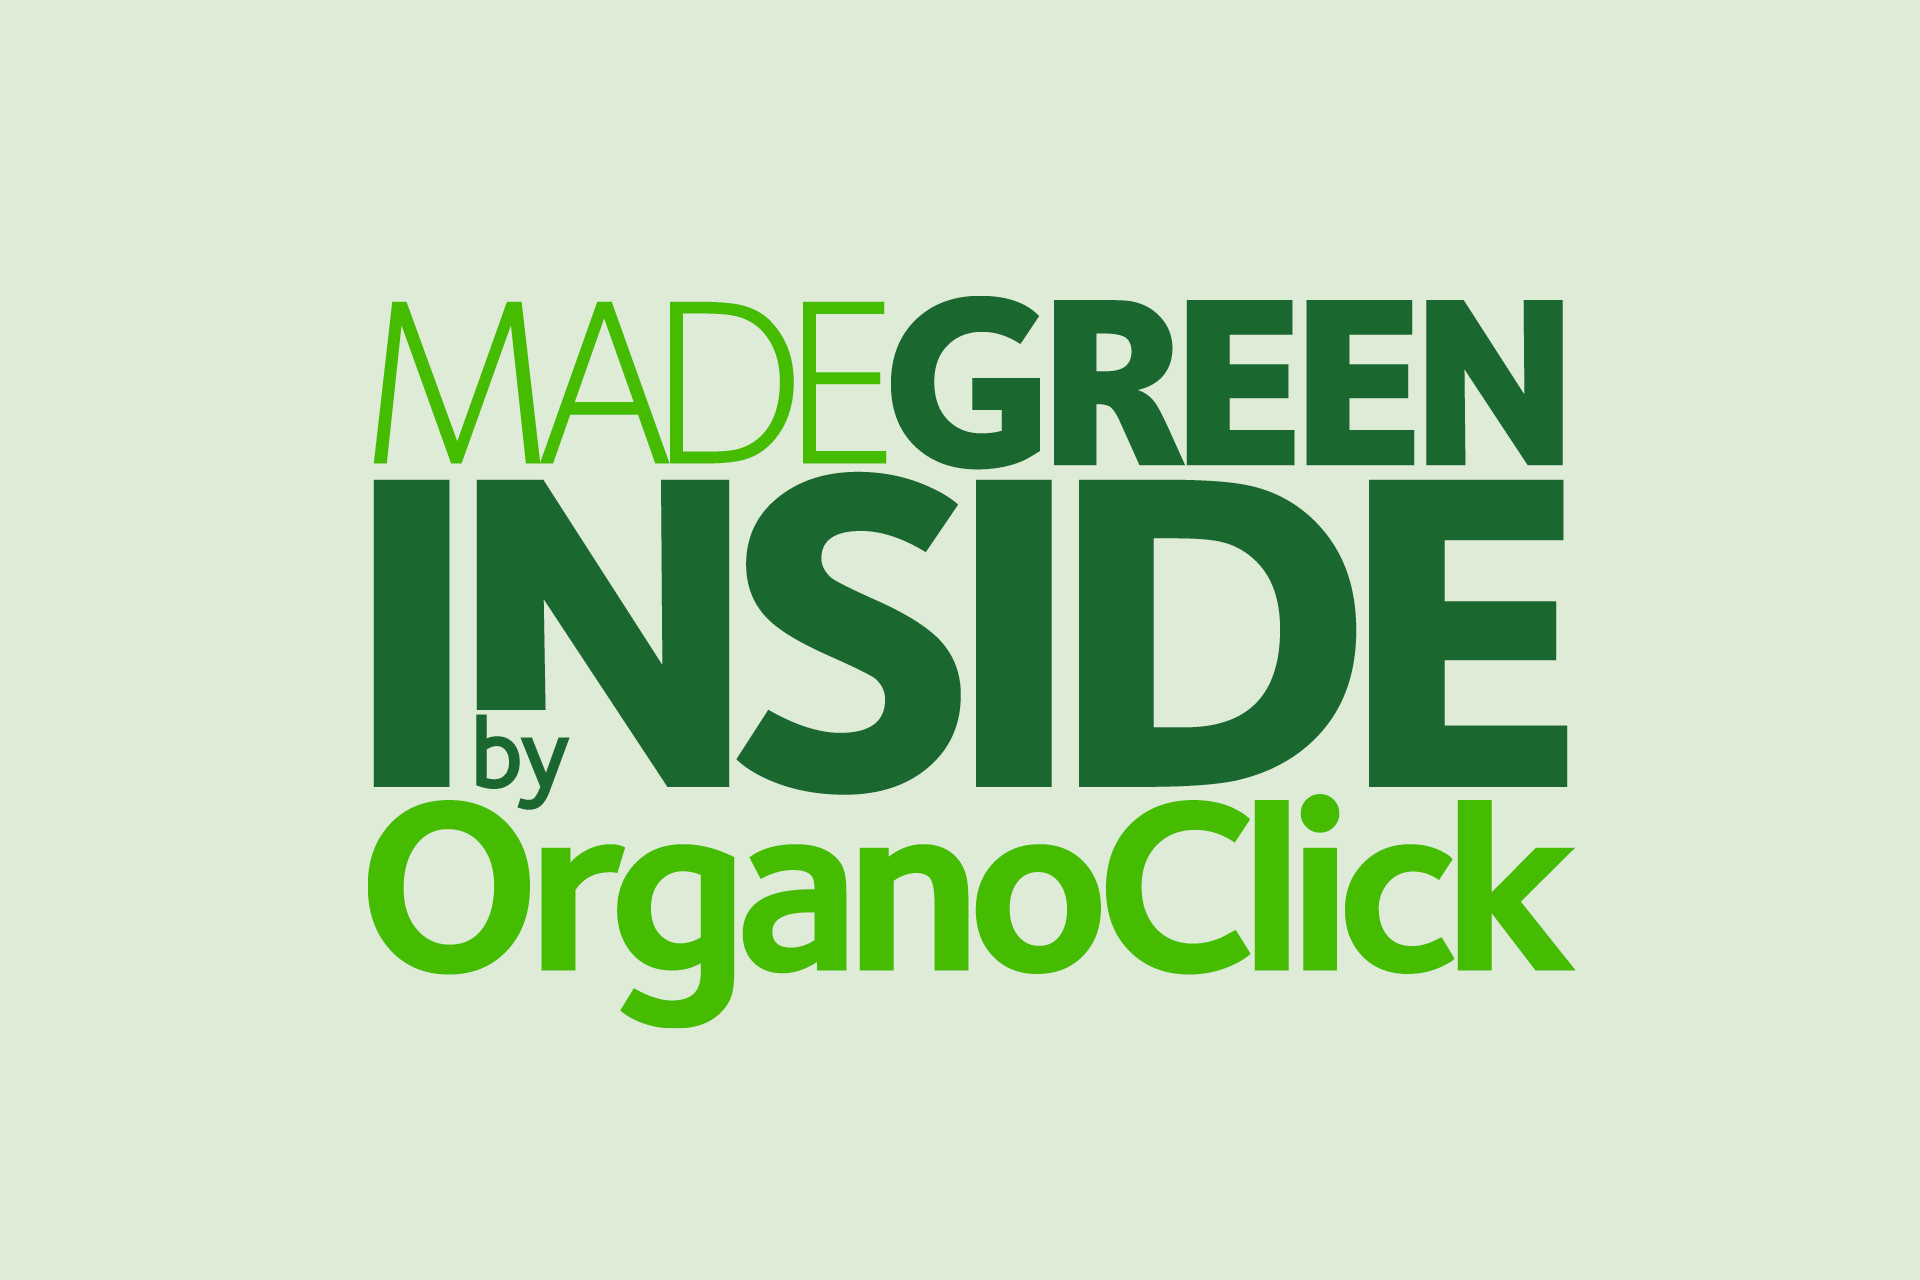 Made Green Inside by OrganoClick